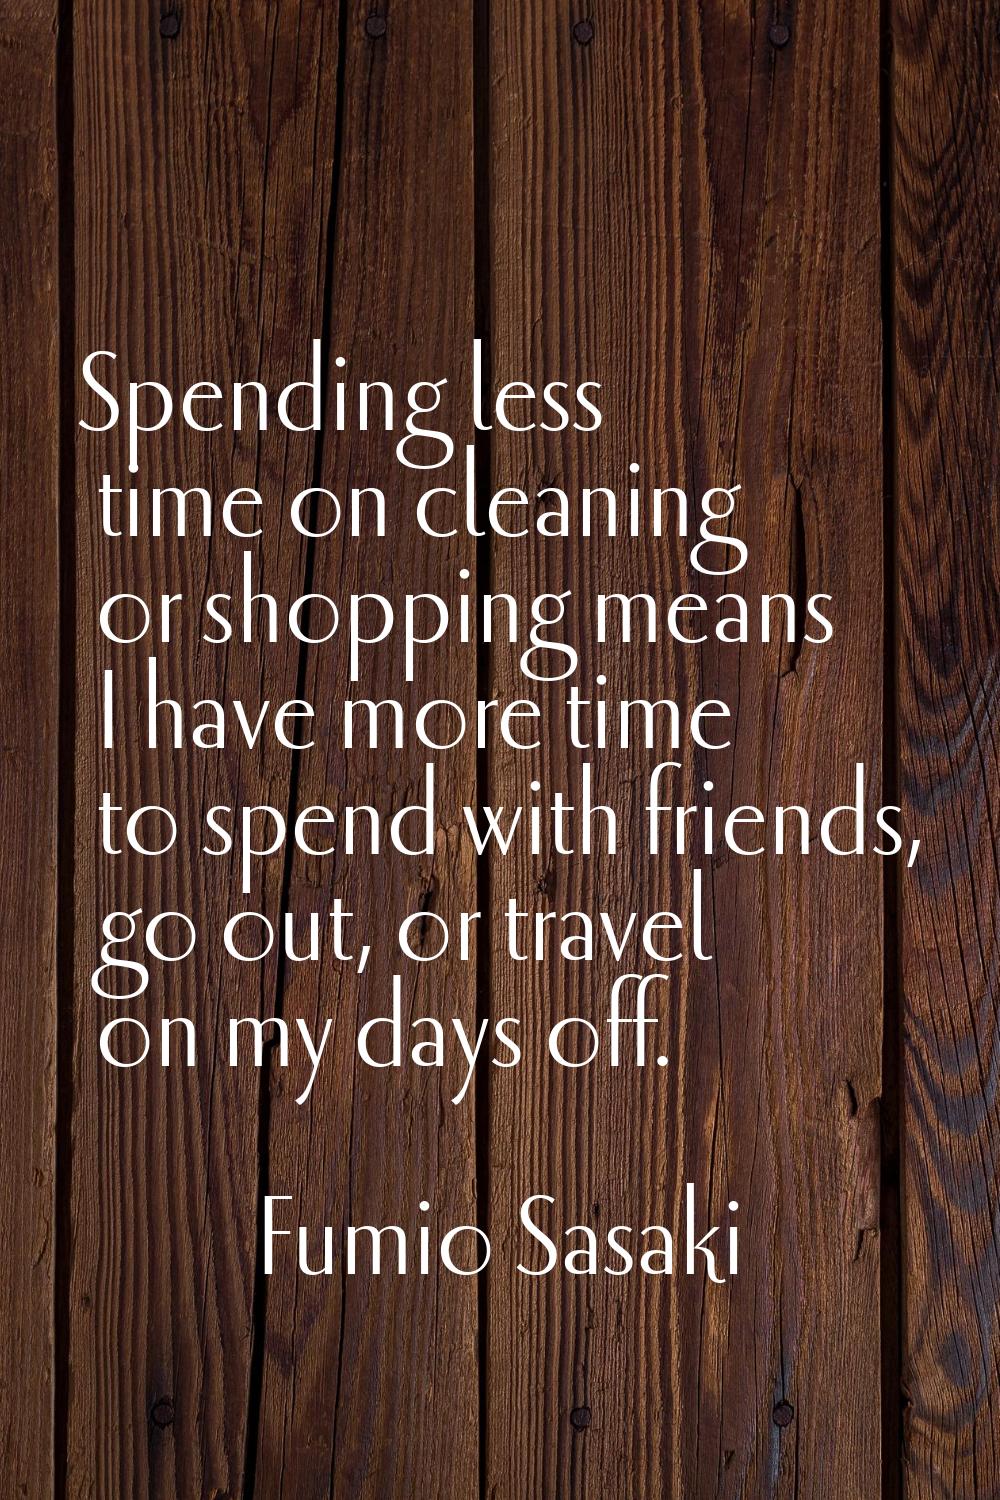 Spending less time on cleaning or shopping means I have more time to spend with friends, go out, or